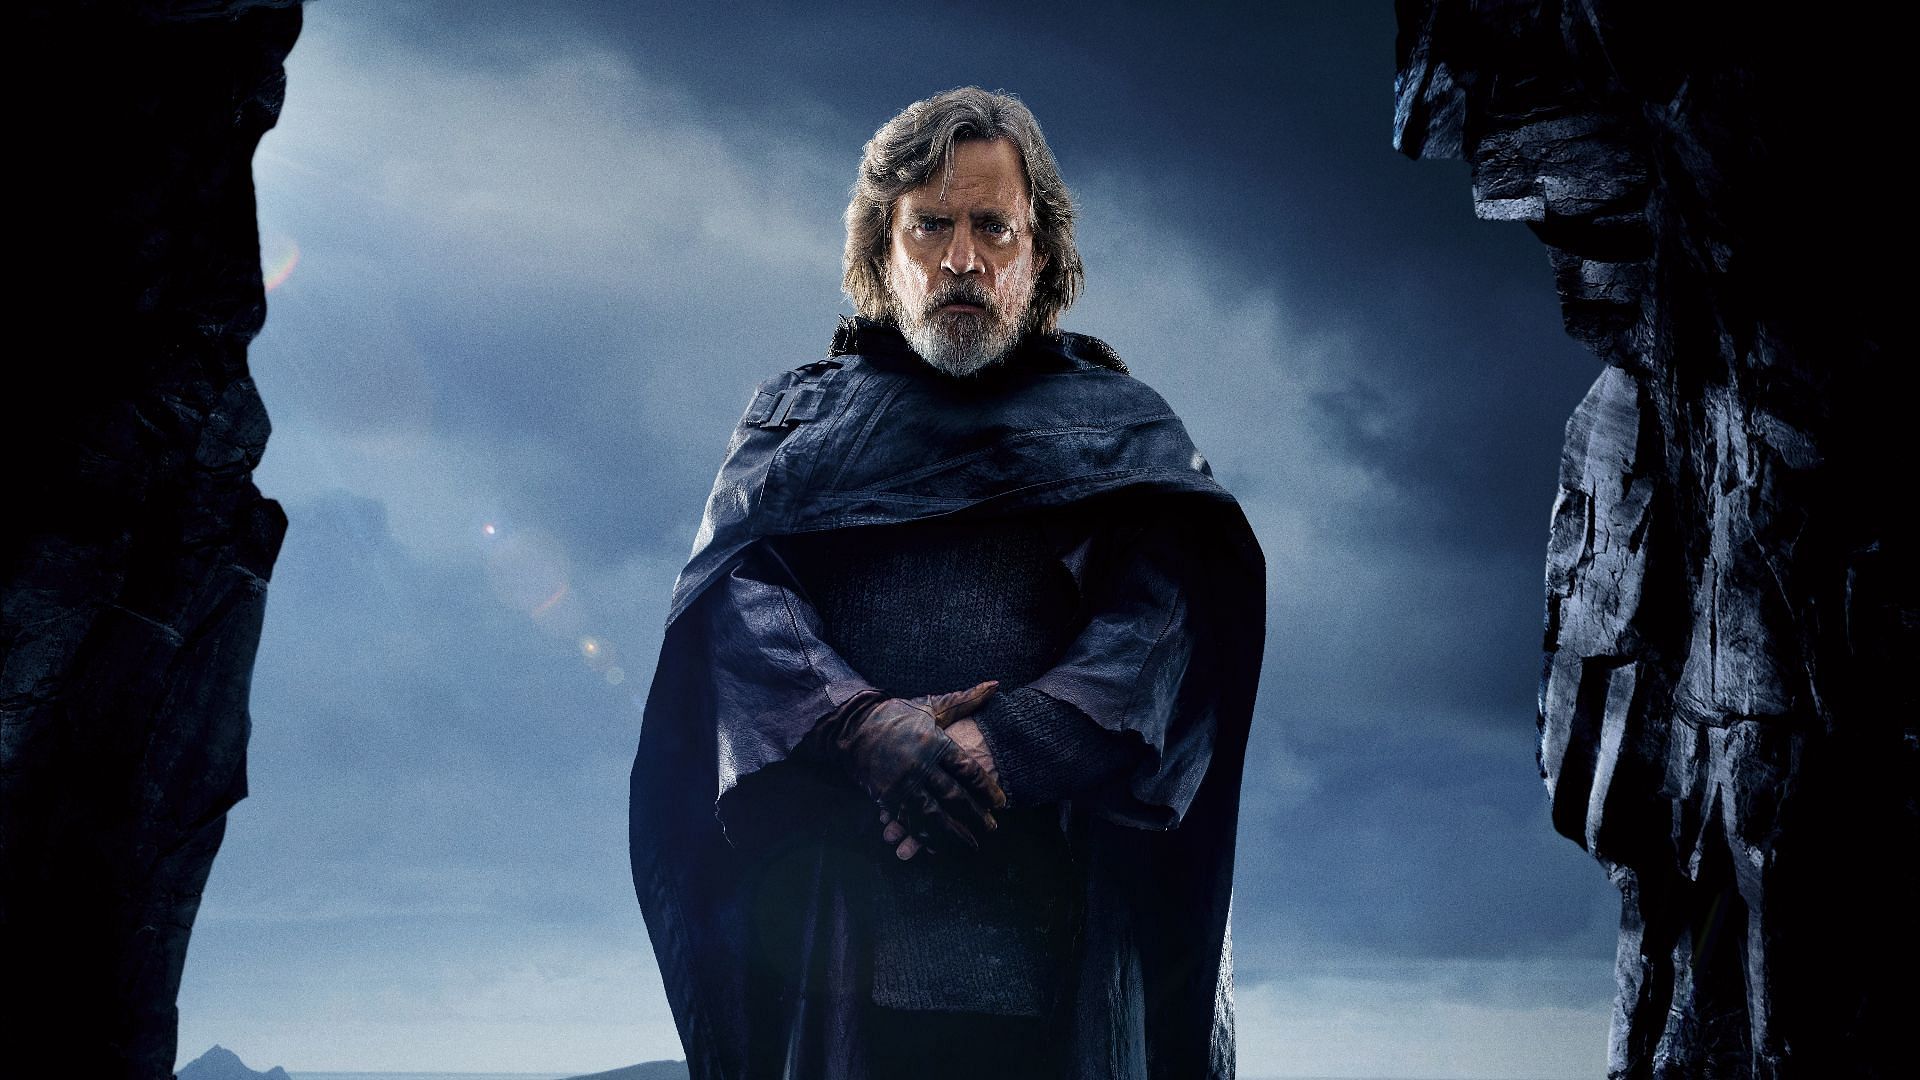 Mark Hamill believes that the role of Luke Skywalker should be recast with an actor who is of the right age (Image via Lucasfilm)